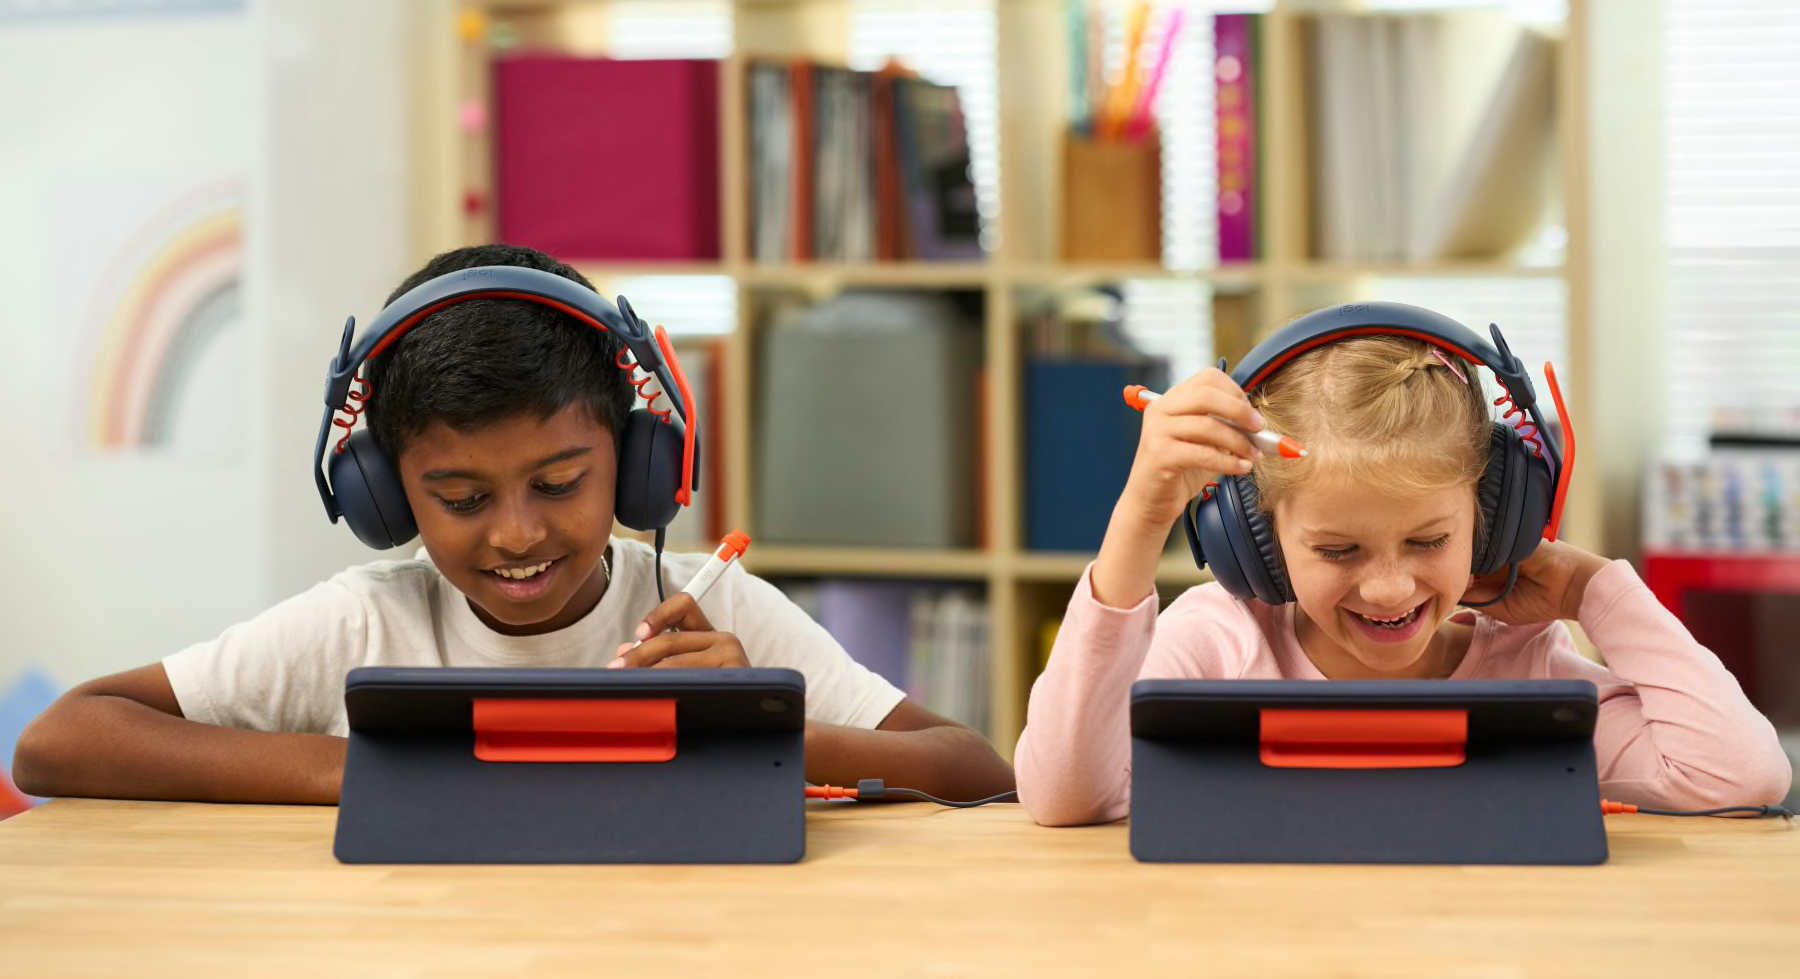 5 Strategies to Lower Classroom Noise Pollution With and Without Technology